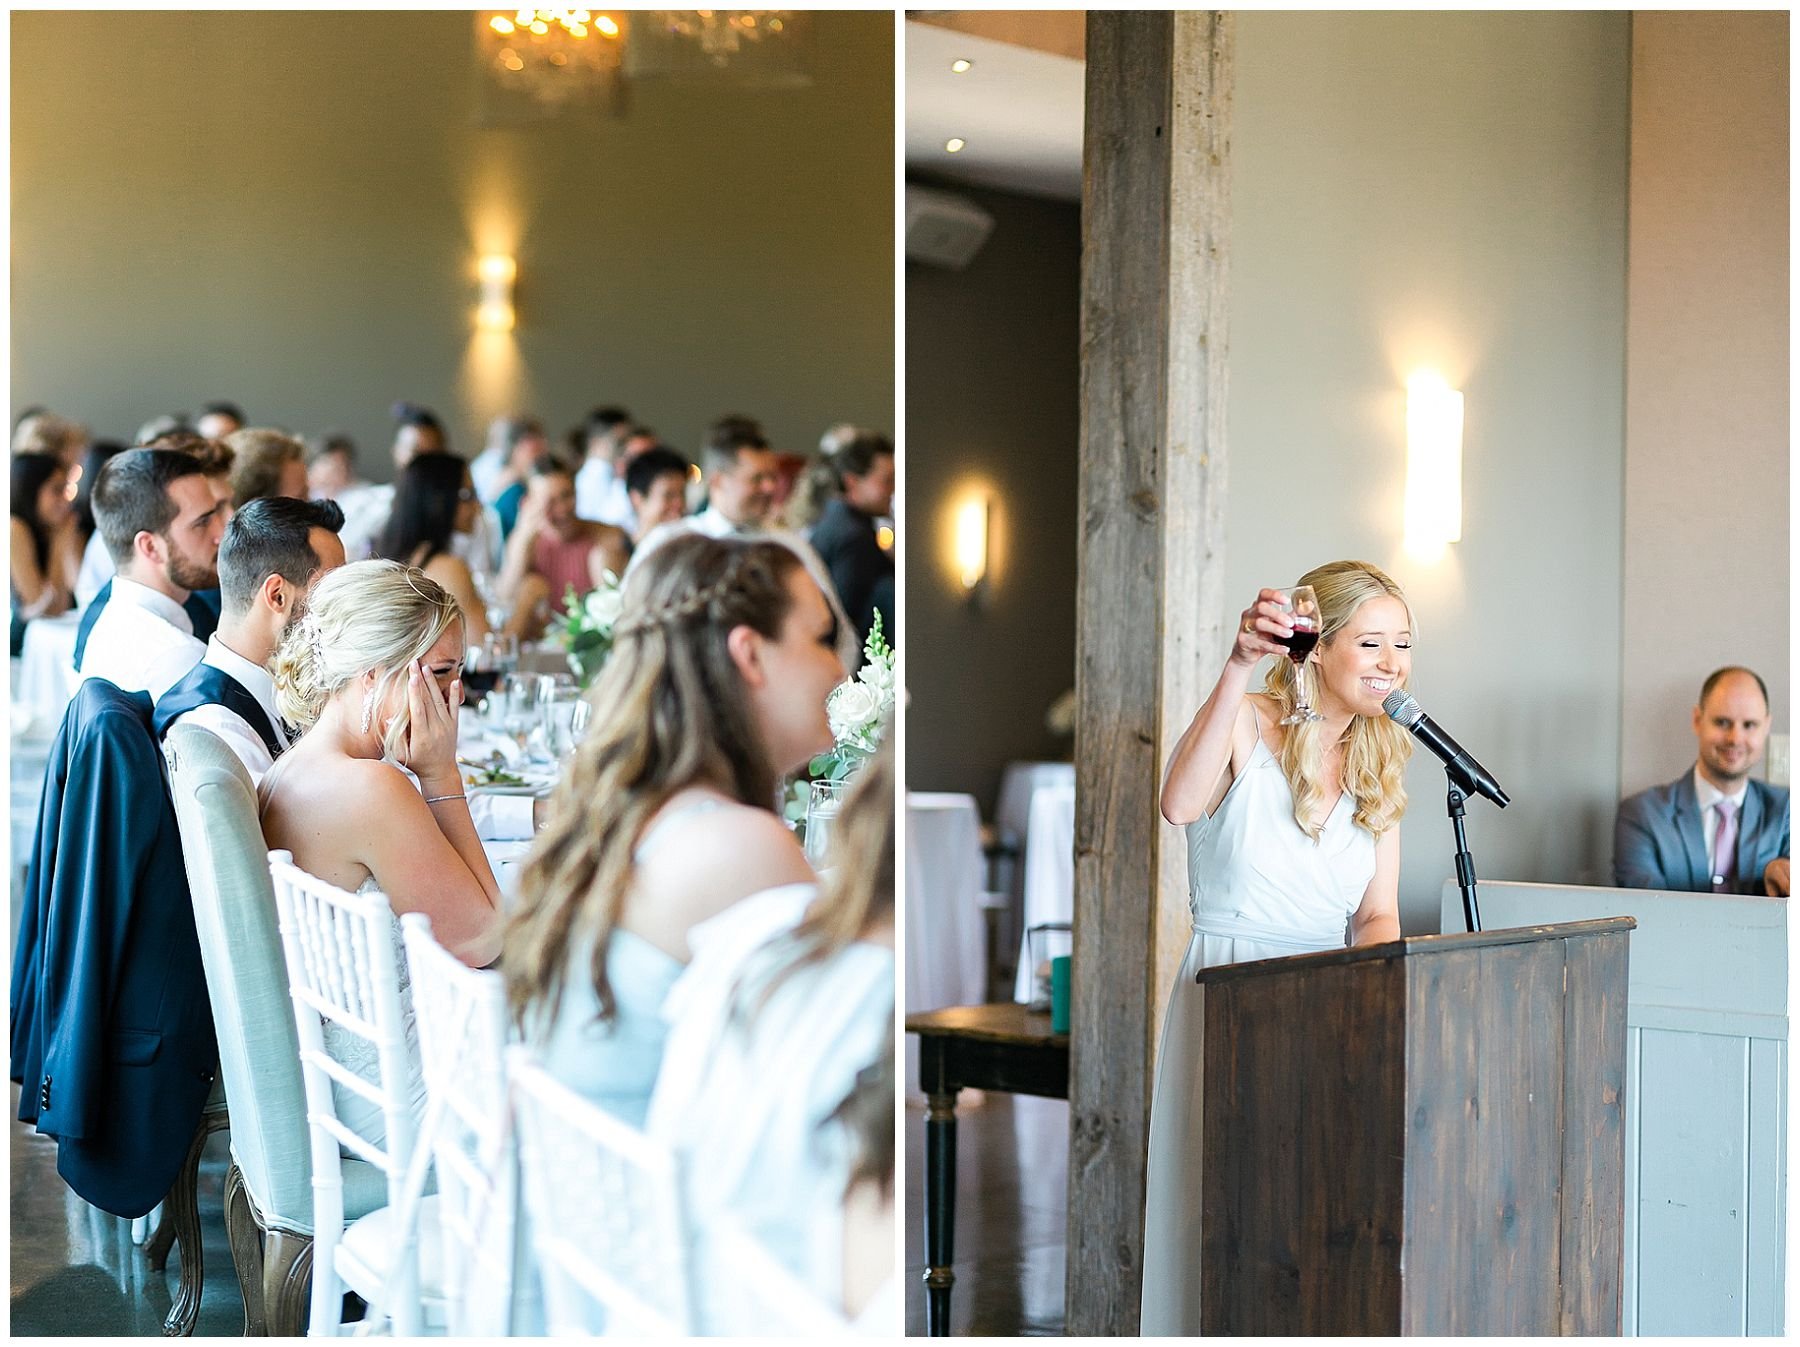 Maid of honor speech makes bride cry at le belvedere